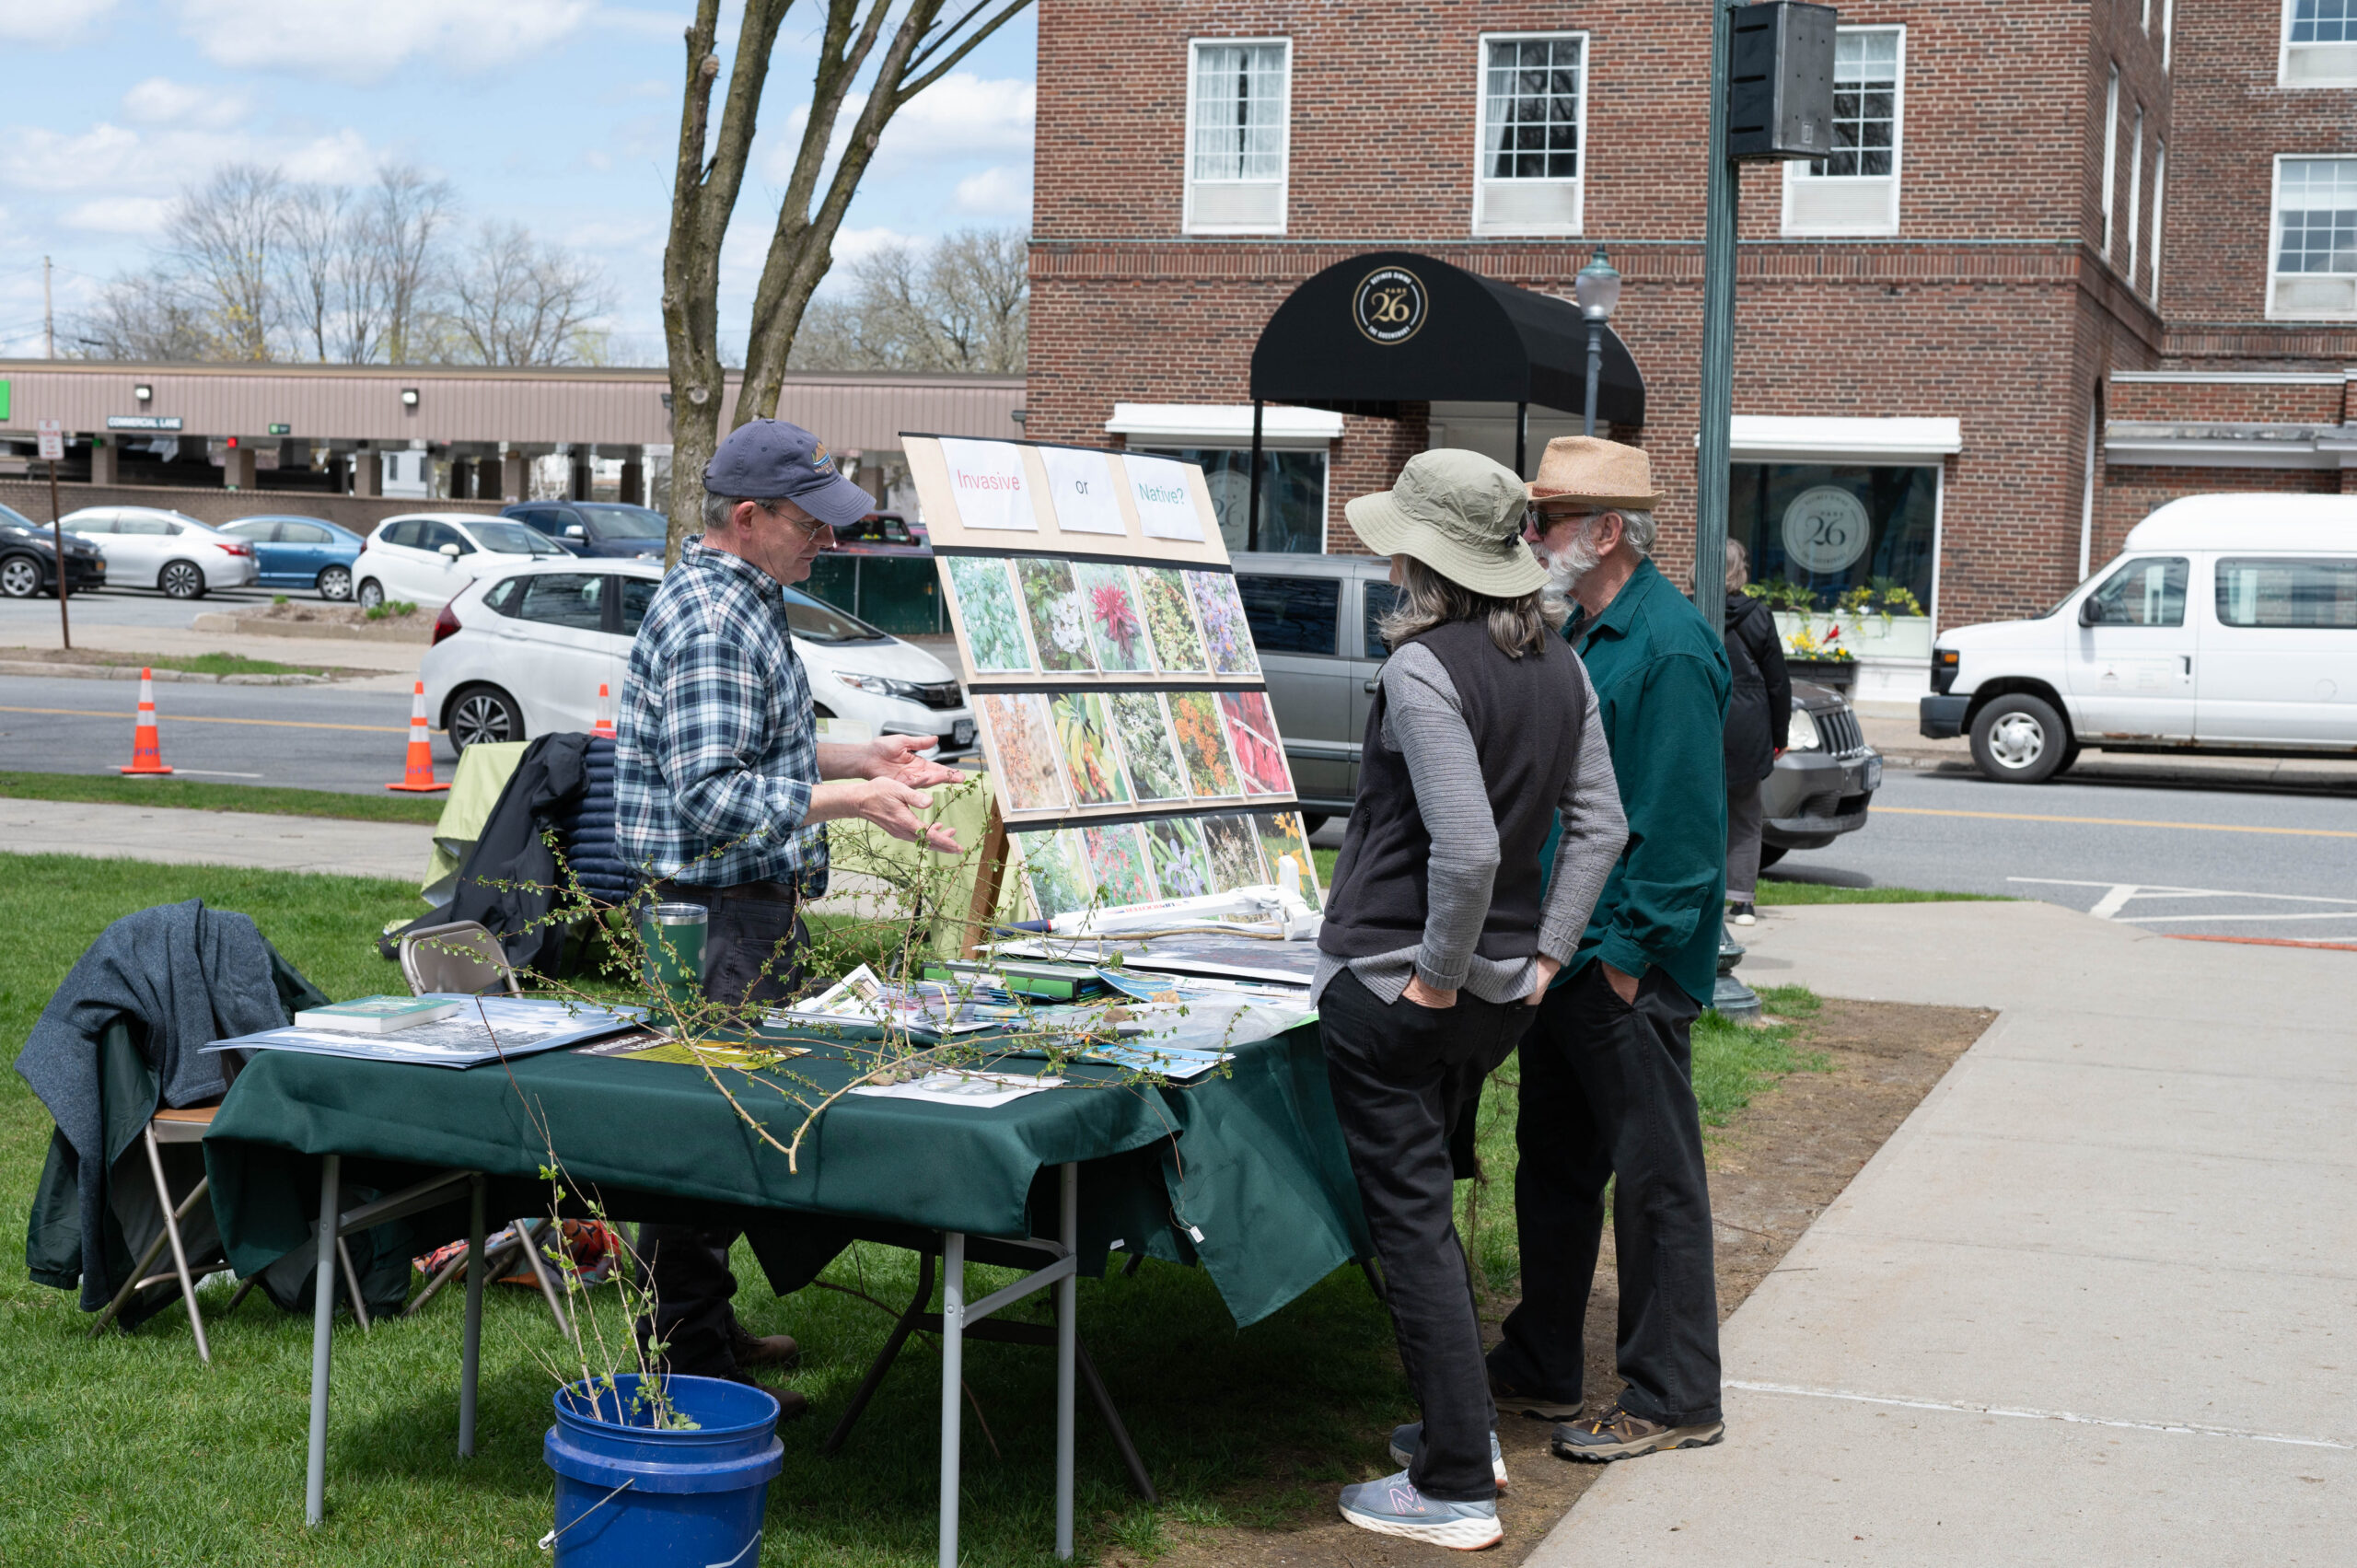 Glens Falls celebrates planet with 4th annual Earth Day celebration